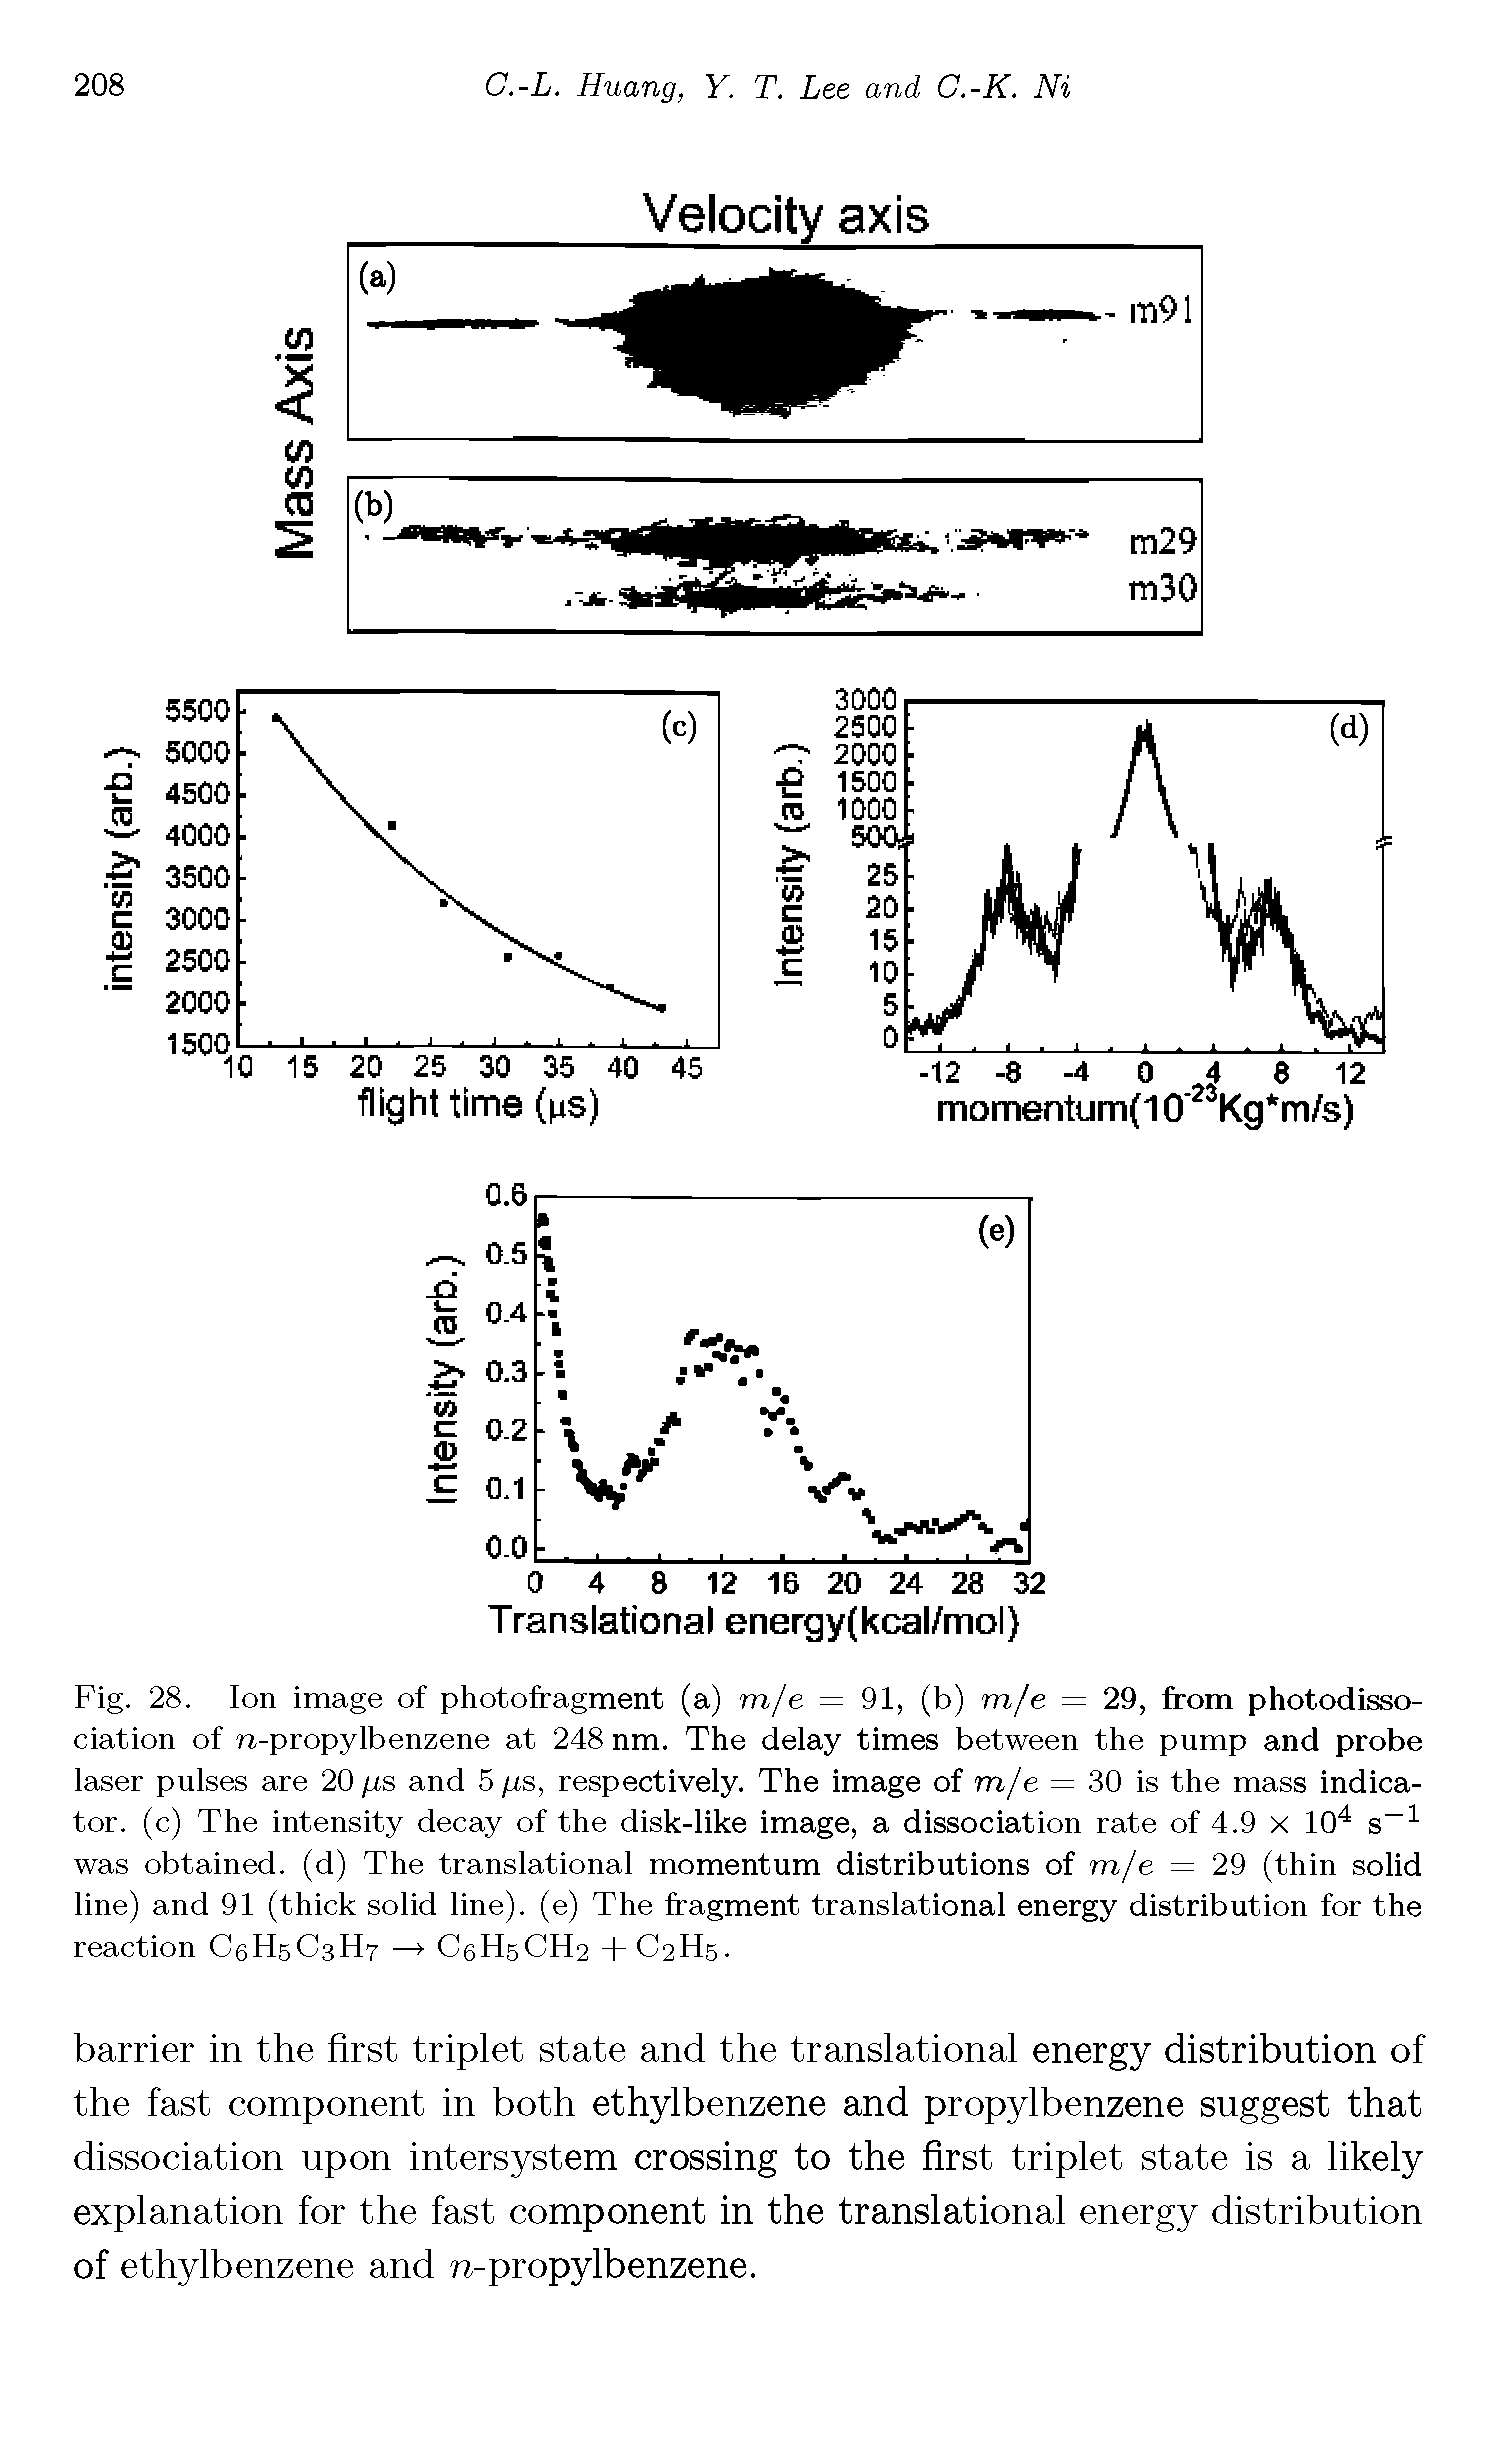 Fig. 28. Ion image of photofragment (a) m/e = 91, (b) m/e = 29, from photodissociation of ra-propylbenzene at 248 nm. The delay times between the pump and probe laser pulses are 20 /is and 5 /is, respectively. The image of m/e = 30 is the mass indicator. (c) The intensity decay of the disk-like image, a dissociation rate of 4.9 x 104 s-1 was obtained, (d) The translational momentum distributions of m/e = 29 (thin solid line) and 91 (thick solid line), (e) The fragment translational energy distribution for the reaction C6H5C3H7 - C6HbCH2 +C2H5.